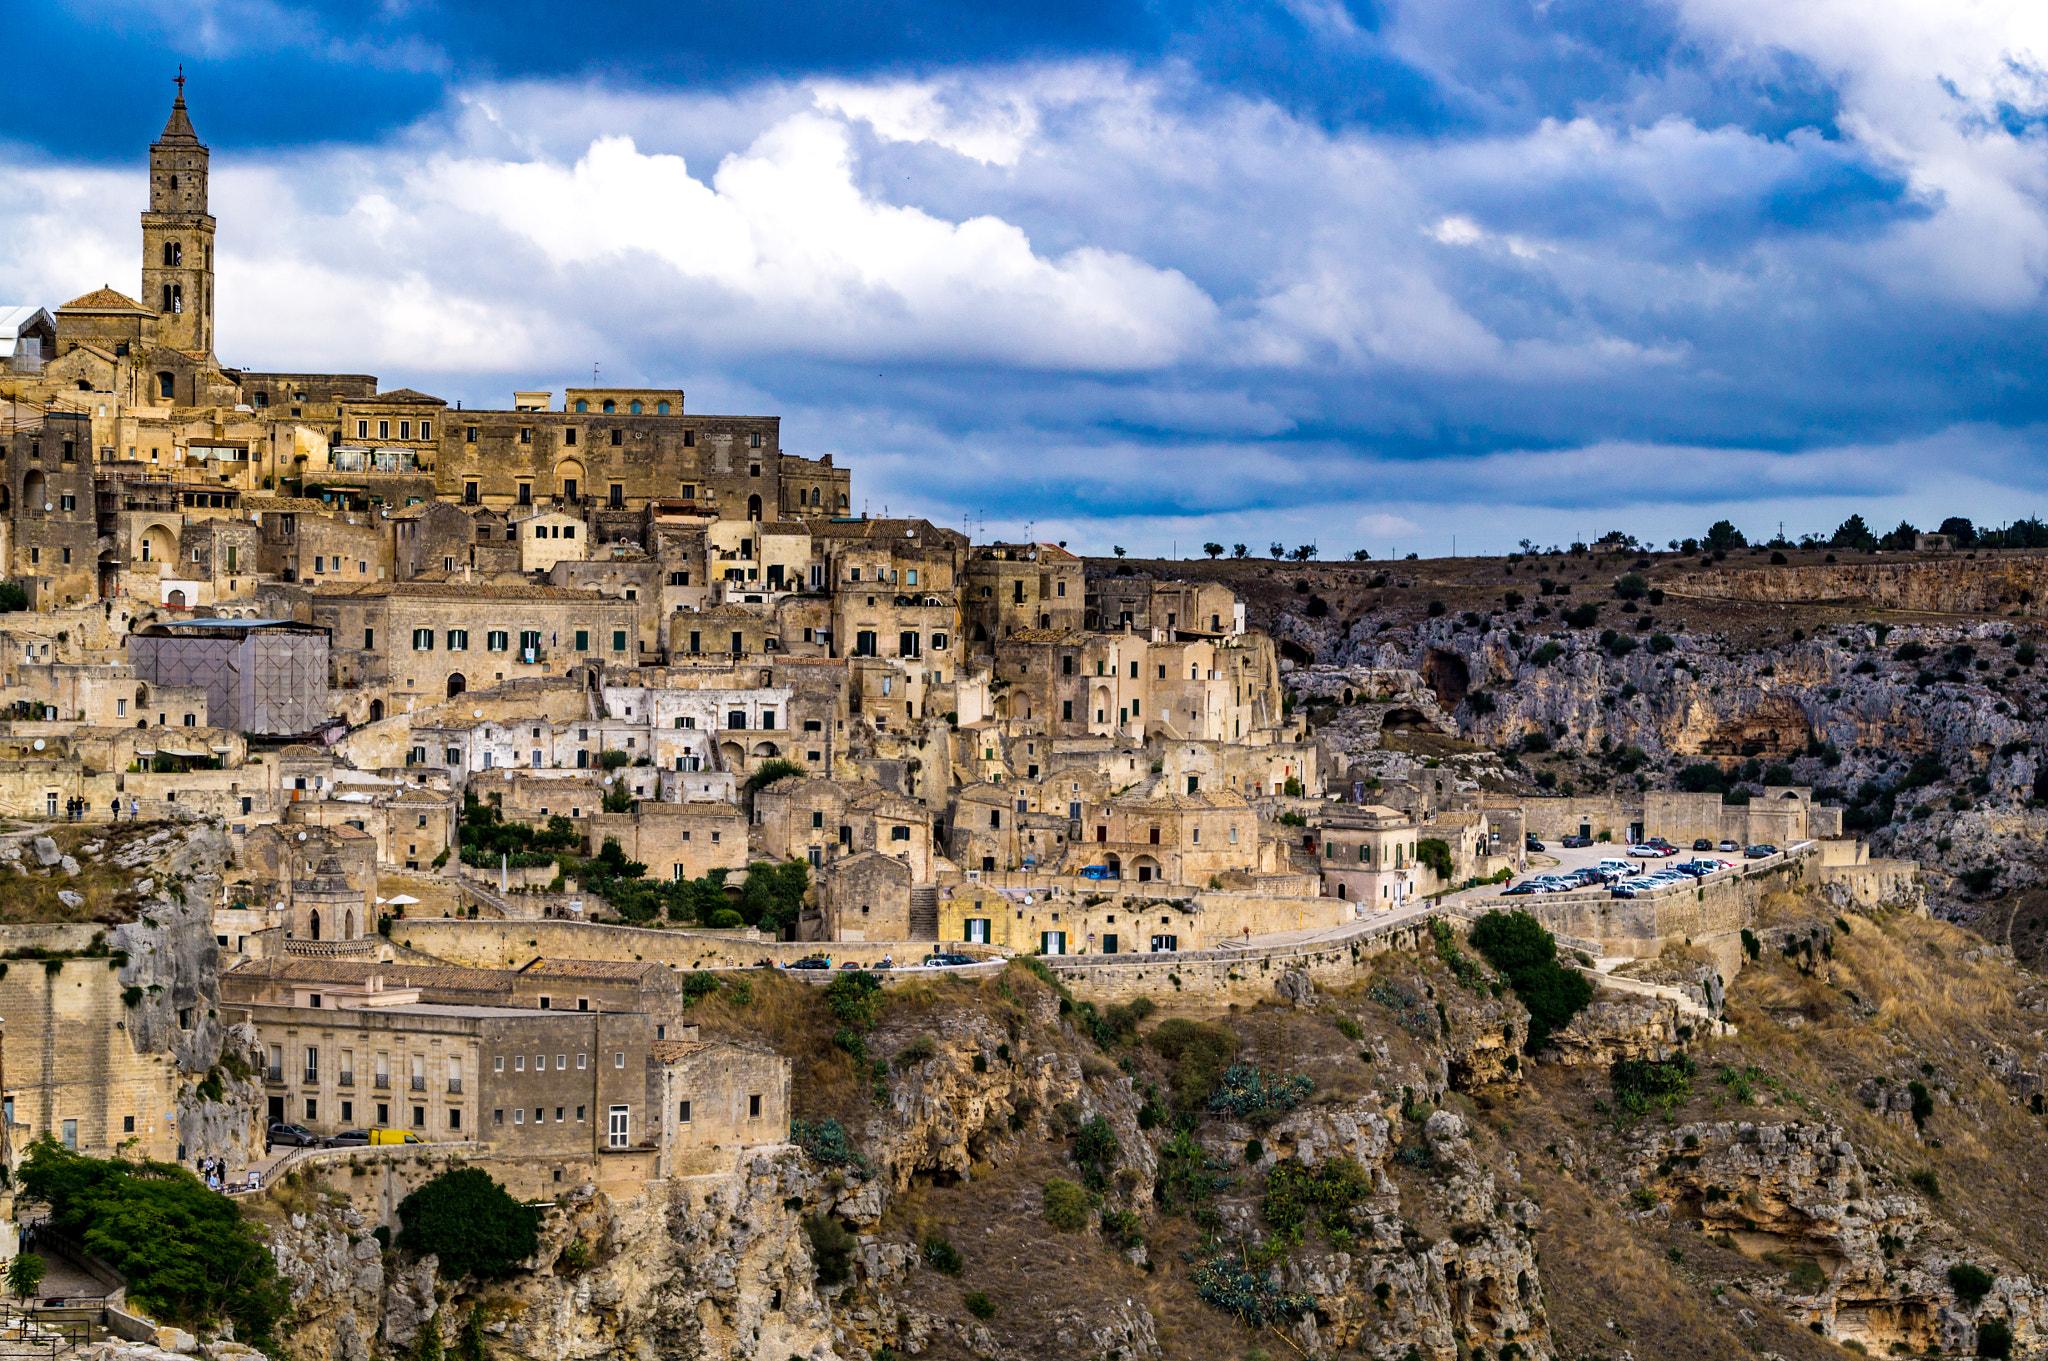 Sony SLT-A57 + Tamron 18-270mm F3.5-6.3 Di II PZD sample photo. Matera -  middle ages city photography